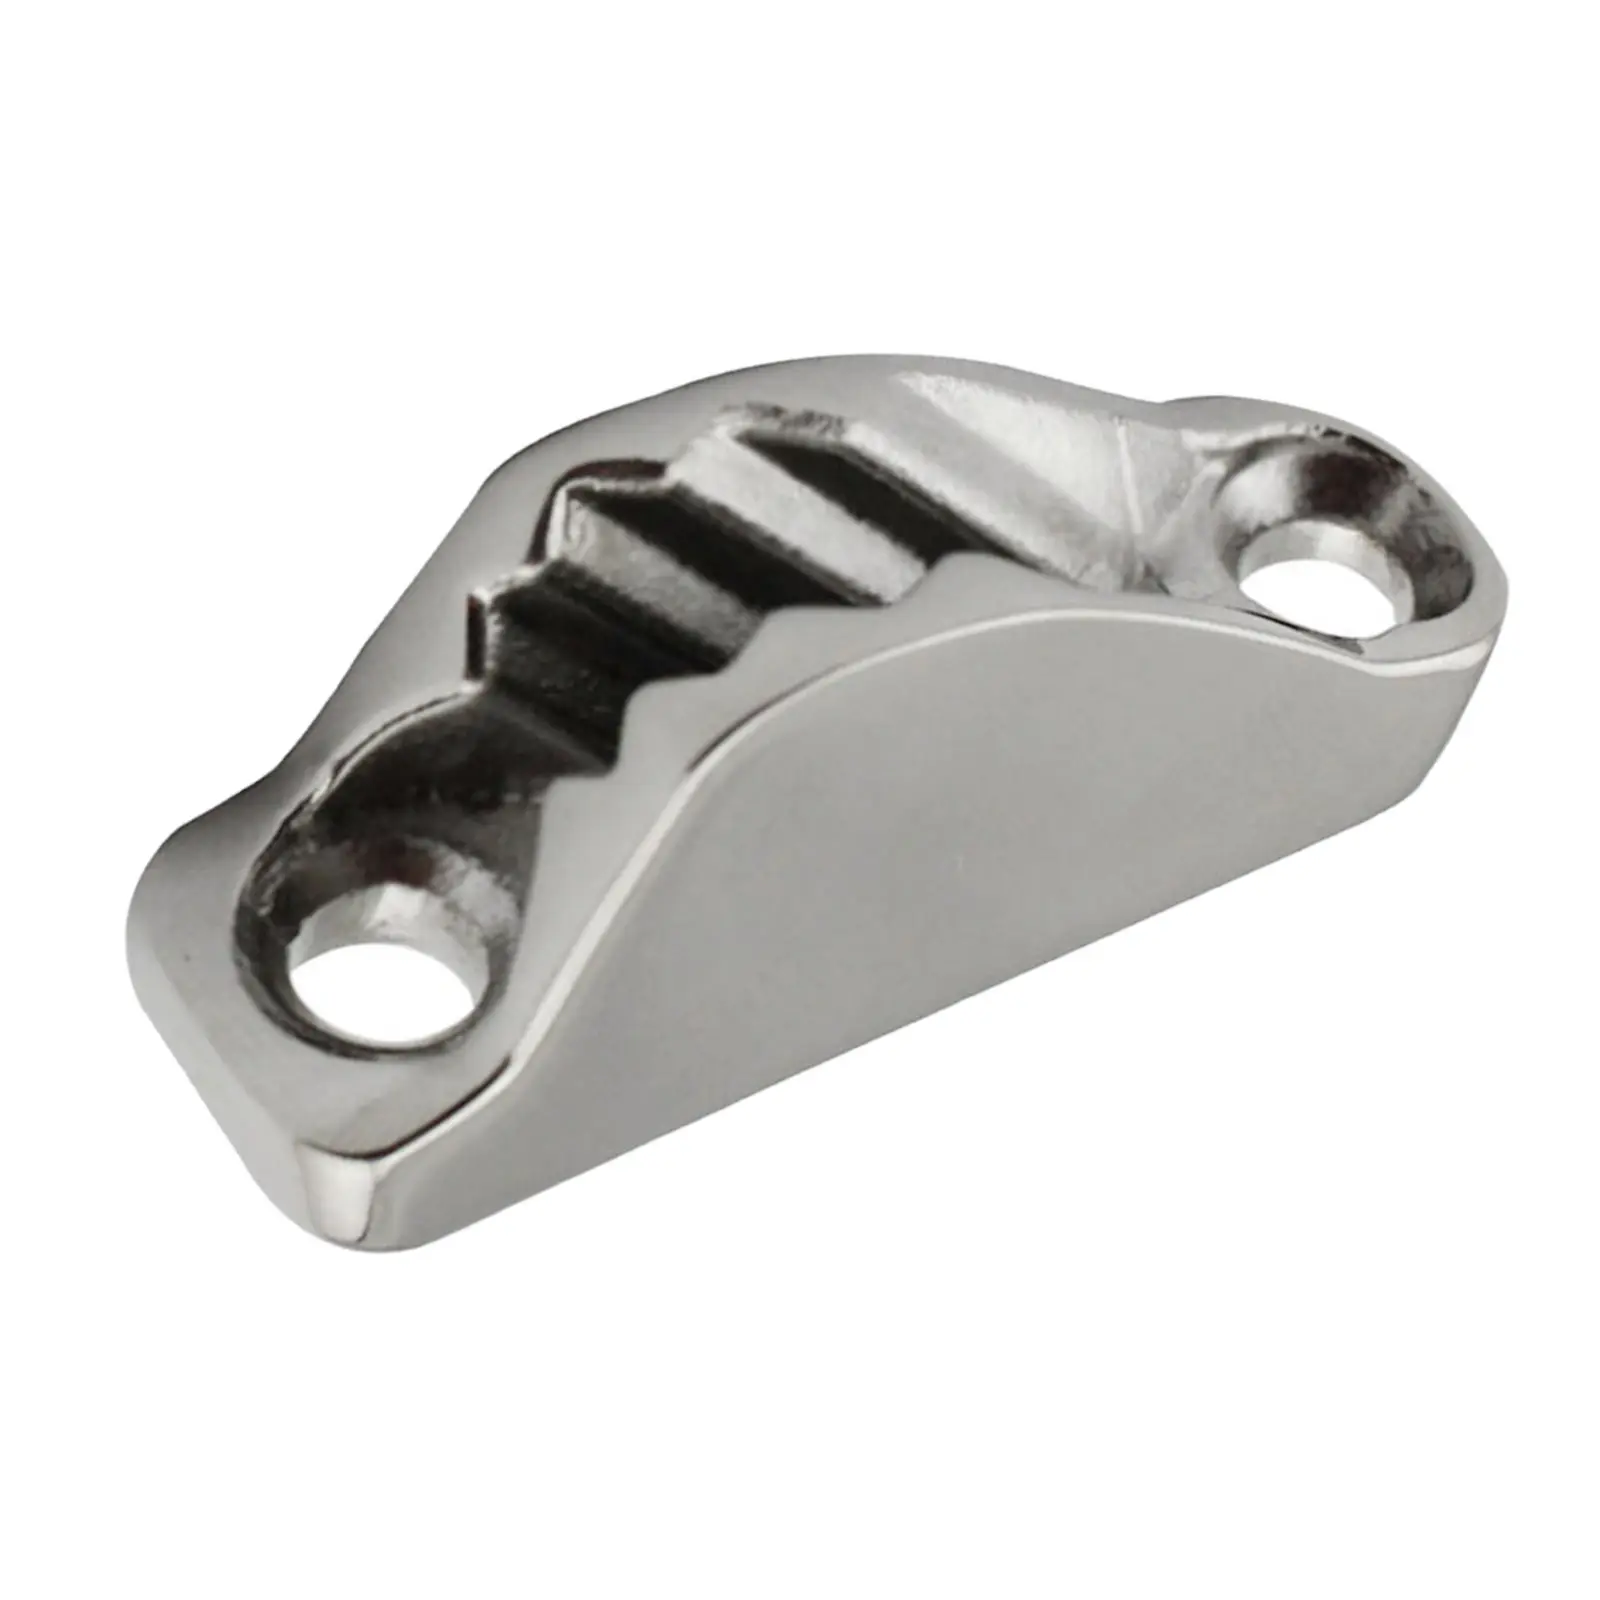 Mag Sailing Boat 316 Stainless Steel Clam Cleat Rope and Line Cleat Jam Cleat for 3mm-6mm Rope